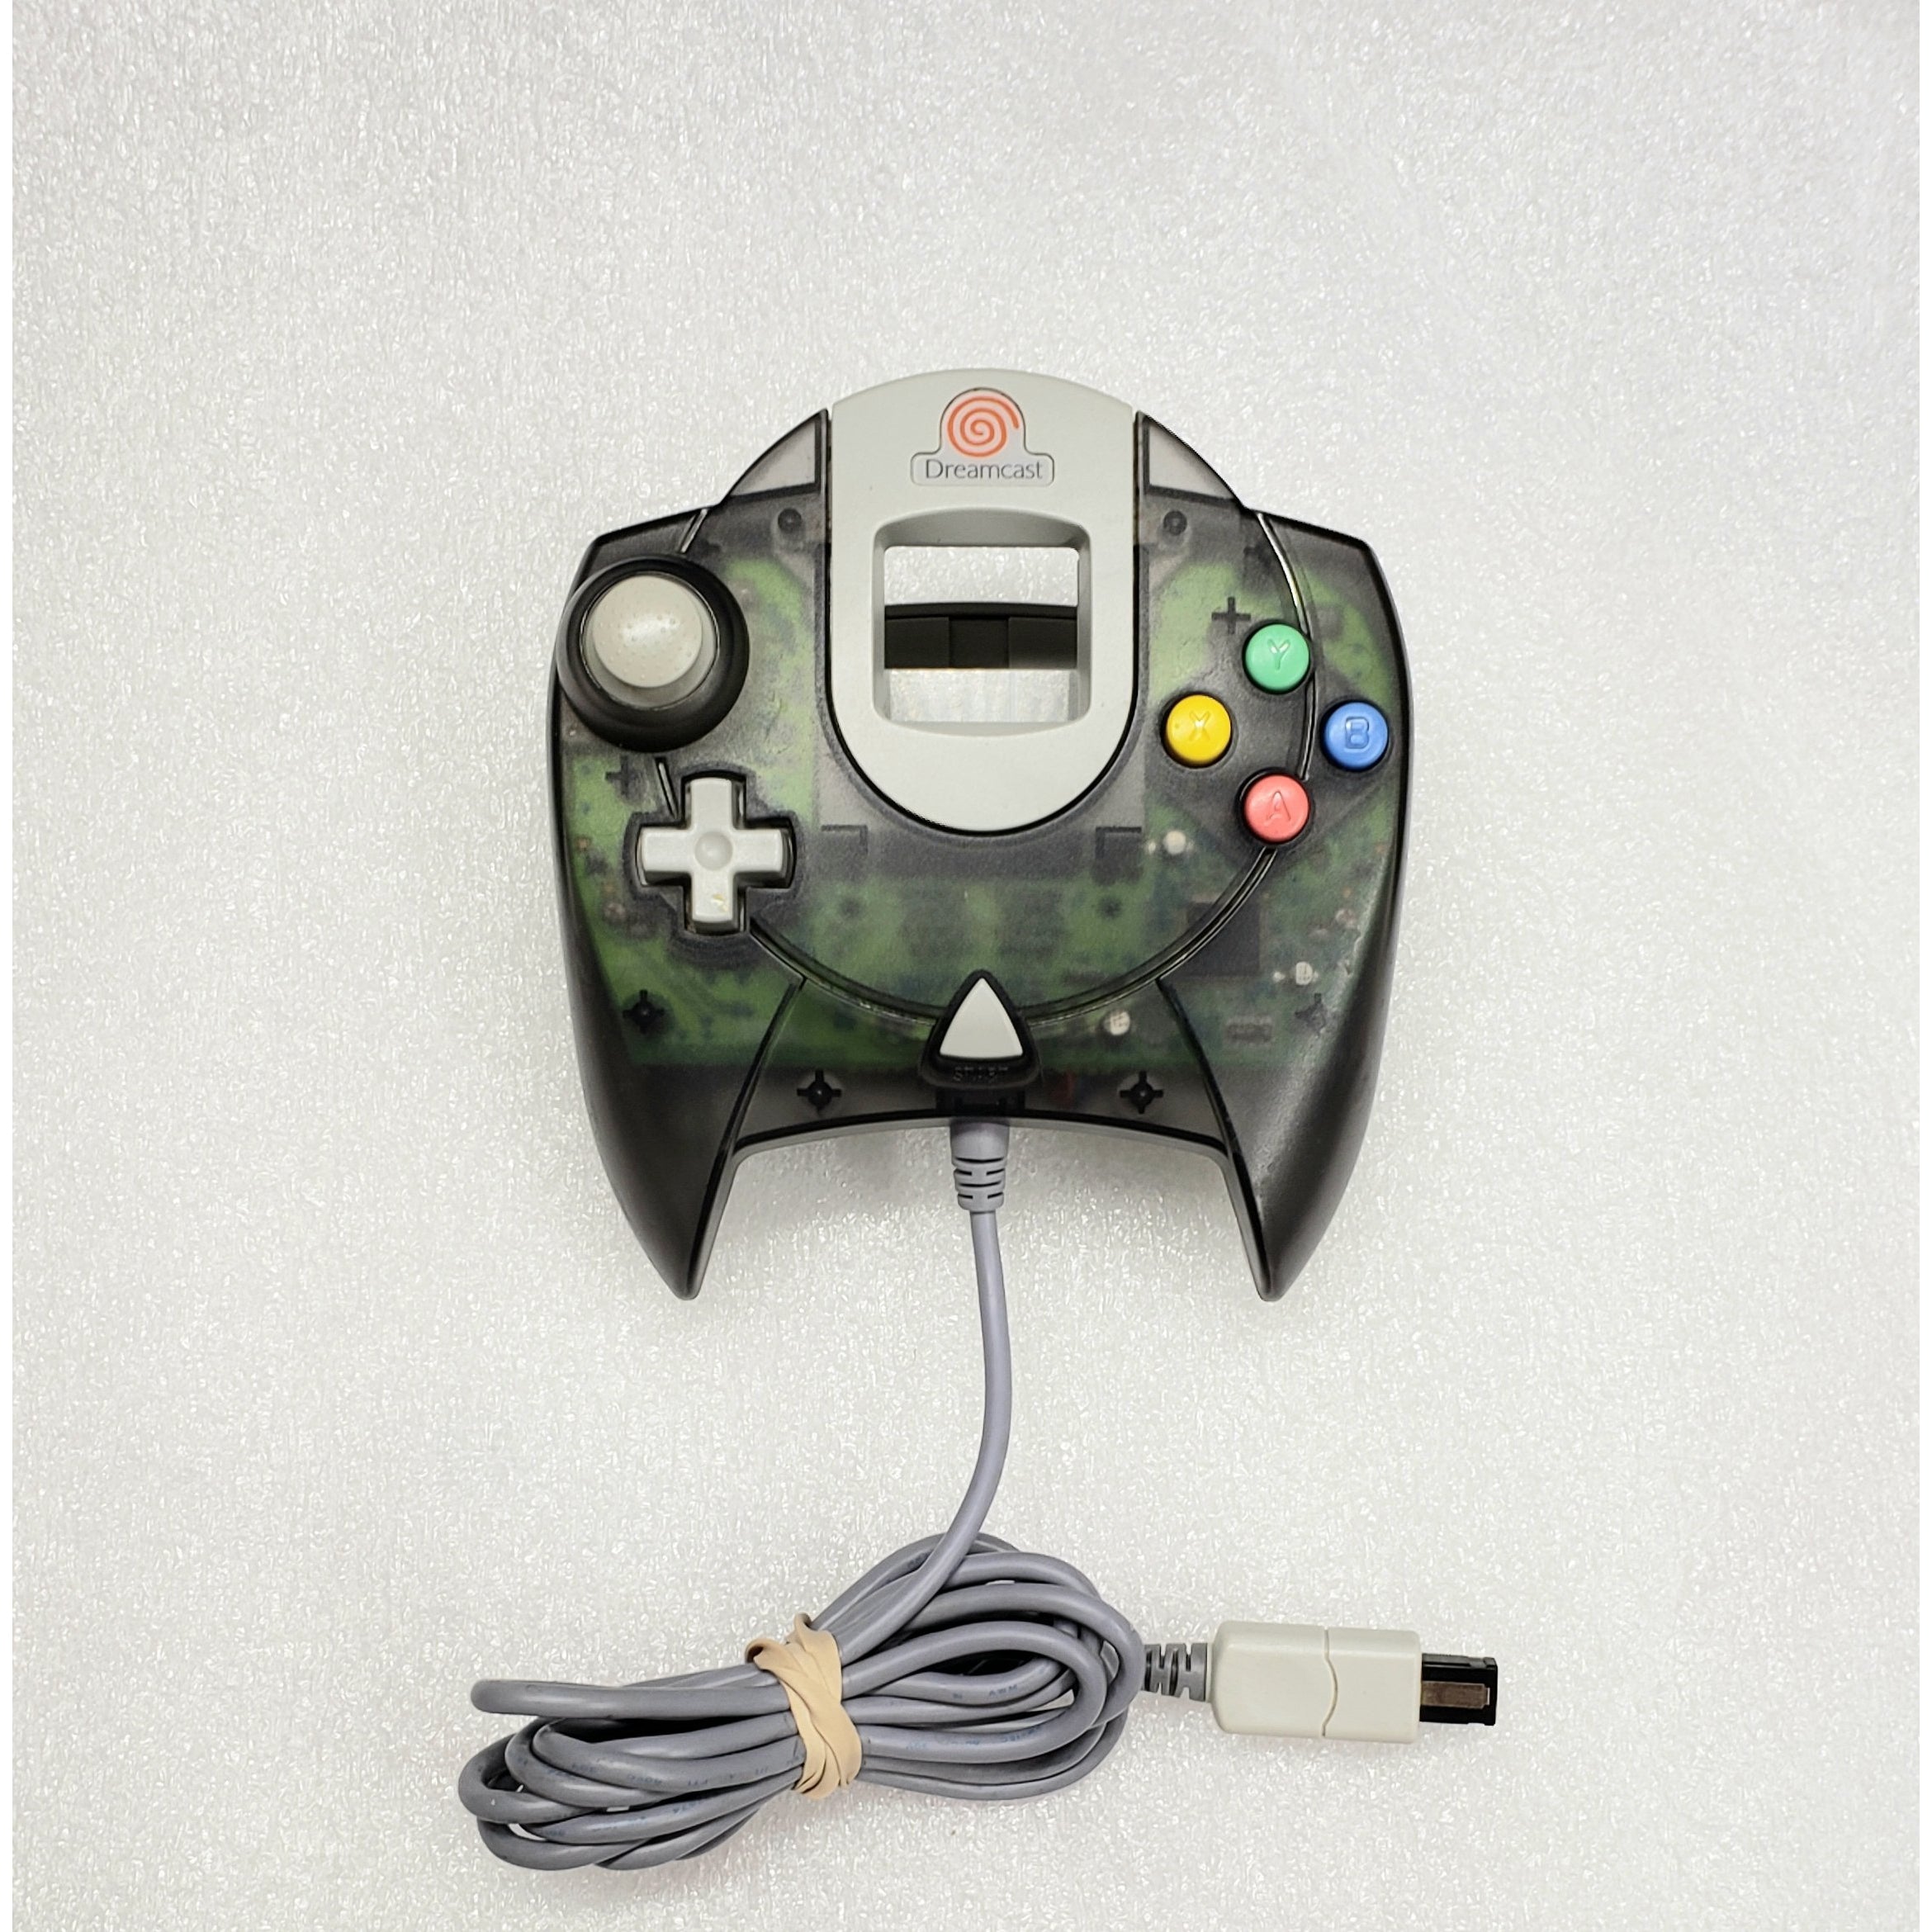 Sega Dreamcast Controller - Charcoal Anthracite - YourGamingShop.com - Buy, Sell, Trade Video Games Online. 120 Day Warranty. Satisfaction Guaranteed.